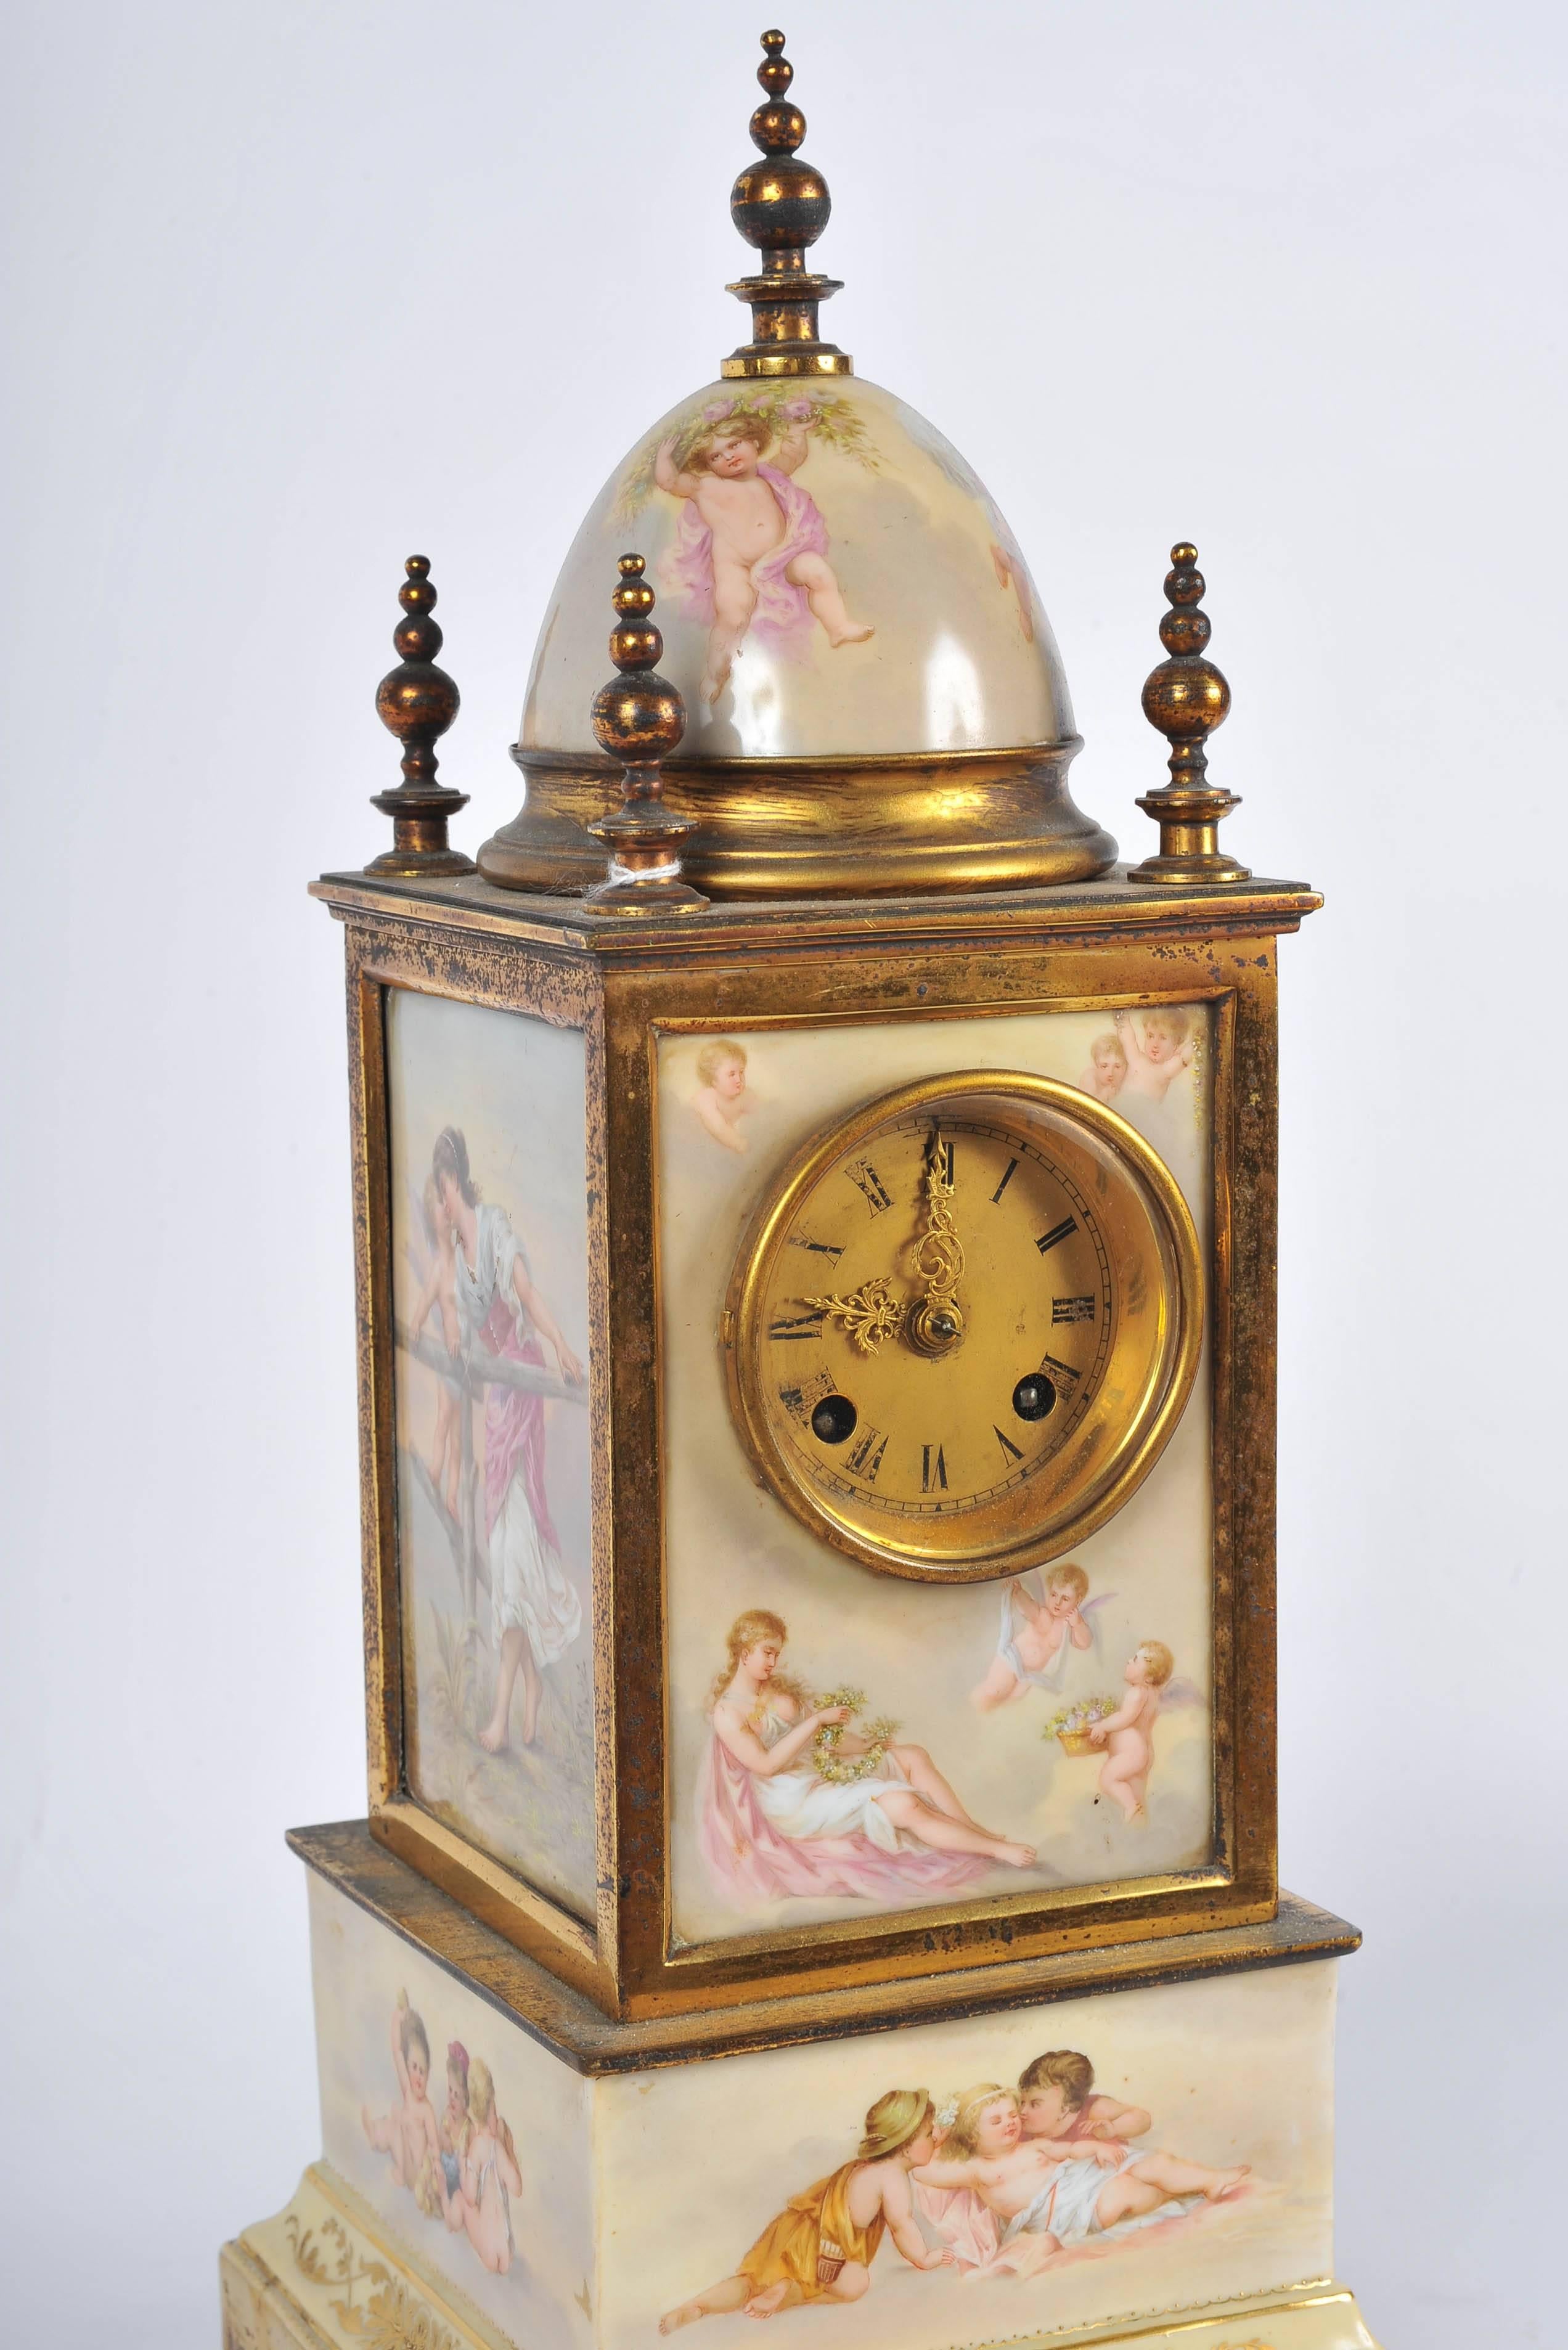 A good quality 19th century Vienna porcelain mantel clock. Each of the porcelain panels depicting classical scenes, set in gilded ormolu. The clock being an eight-day movement and chimes on the hour.